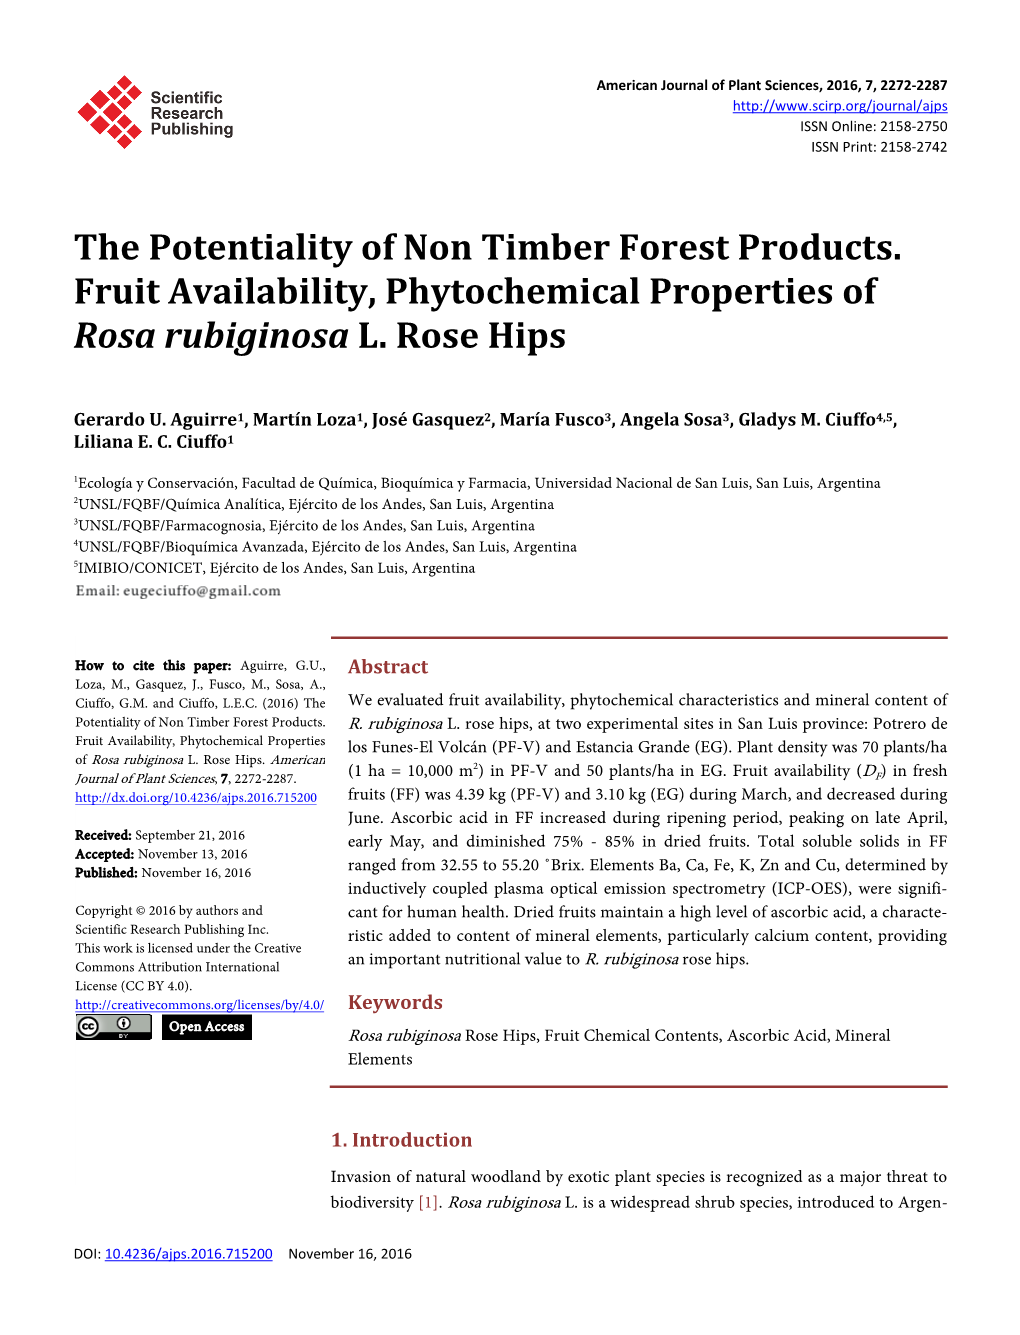 The Potentiality of Non Timber Forest Products. Fruit Availability, Phytochemical Properties of Rosa Rubiginosa L